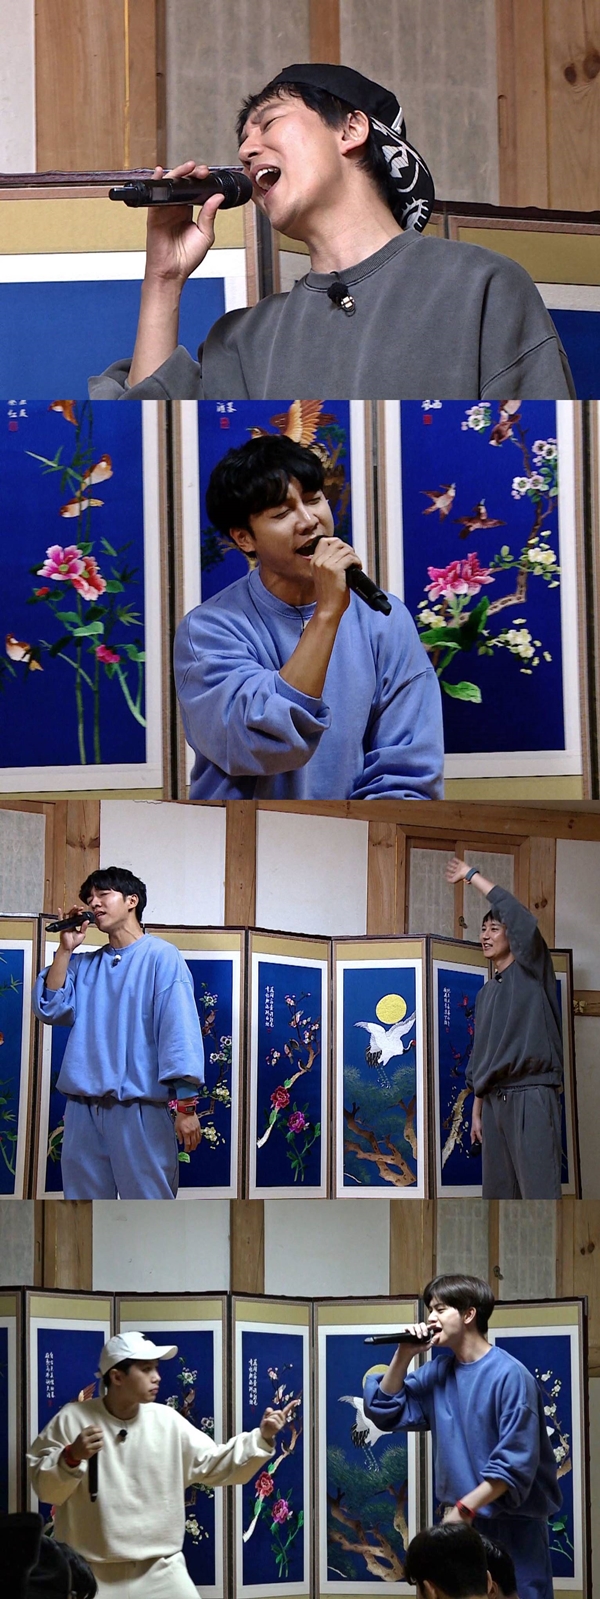 Kim Nam-gil sings a 90s favorite song in All The ButlersOn SBS All The Butlers, which is broadcasted at 6:25 pm on the 16th, the Reversal Story charm of Kim Nam-gil, the target actor, will be revealed.On the day of the broadcast, Kim Nam-gil, All The Butlers Shin Sung-rok, Lee Sang-yoon, Lee Seung-gi, Yang Se-hyeong, and Yoo Sung-jaes Exciting Explosion karaoke scene will be released.They summoned the 90s songs such as Tears and Mung and became a so-called Topgol Idol.In particular, Kim Nam-gil is expected to be able to up the atmosphere with explosive singing ability and low world tension that was not seen anywhere.The members also said that they had an exciting night by releasing stage manners that they had learned from Park Jin-young, master of Dance Shin Dance King.On the other hand, Kim Nam-gil attracted attention not only by dancing but also by completely digesting Lee So-ras Please which is usually his favorite song.His sweet singing skills were not only impressed by the production crew, but also Lee Seung-gi, who had remade the same song earlier.Lee Seung-gi, impressed by the masters song, responded with a song.The two mens Honey Ttuk live will be released on All The Butlers, which will be broadcast at 6:25 pm on the 16th (Sunday).